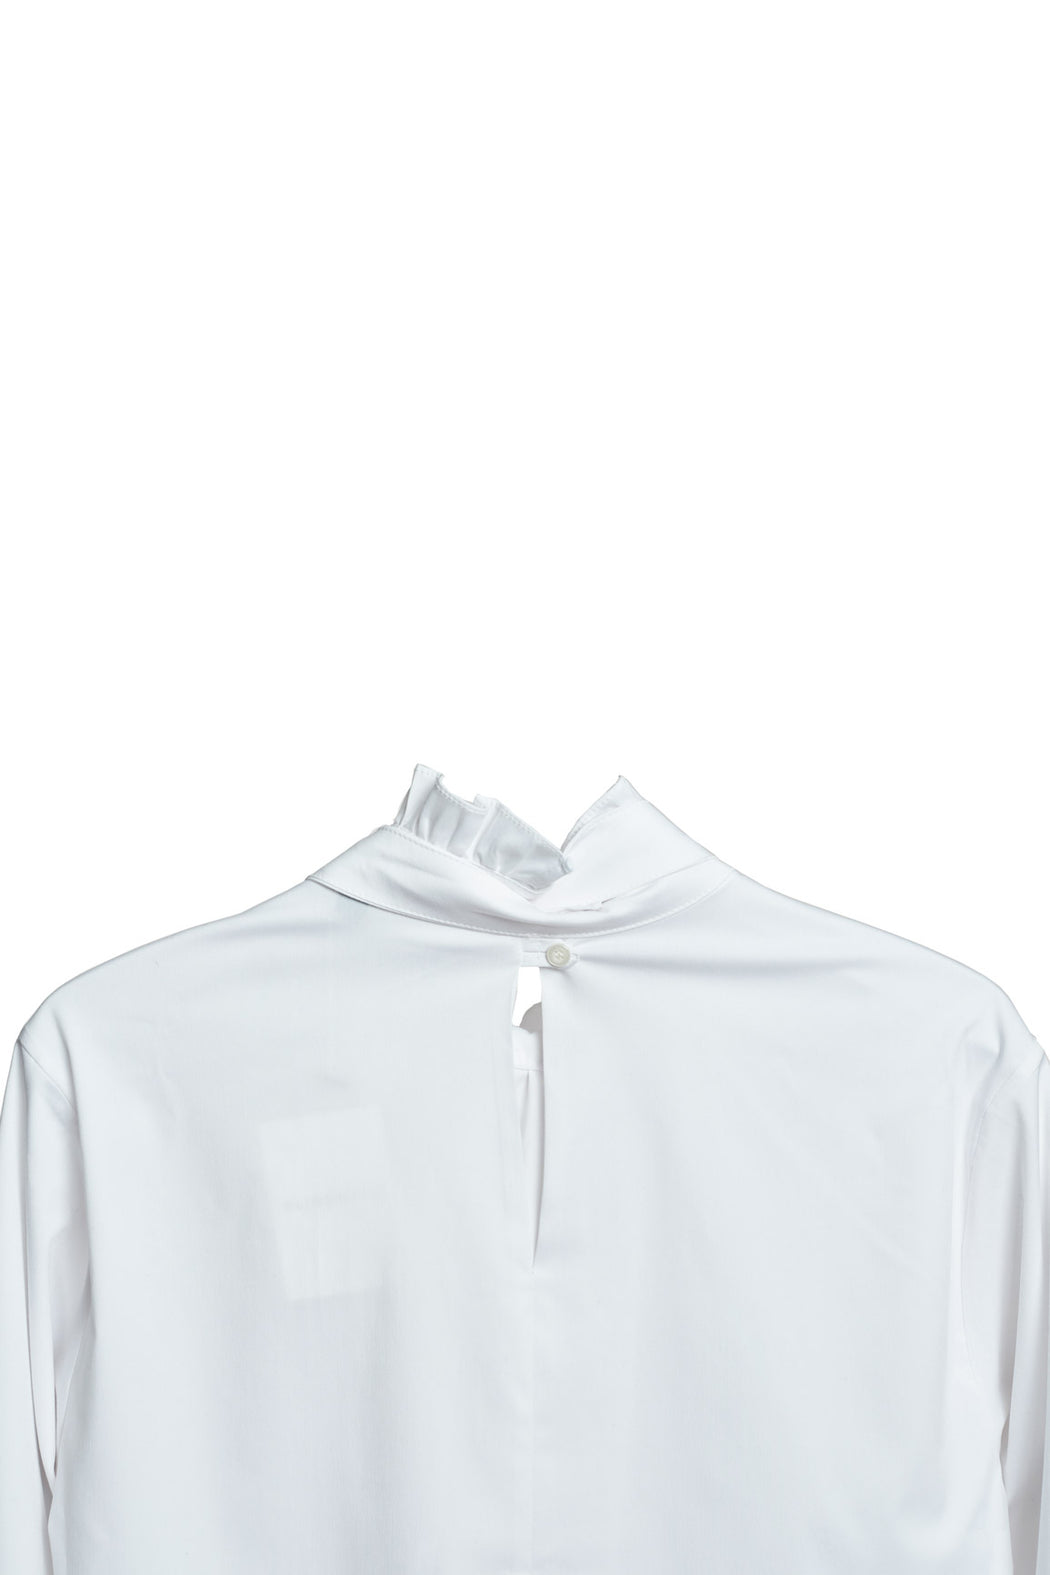 Neck And Cuff Frill Detail Shirt - White